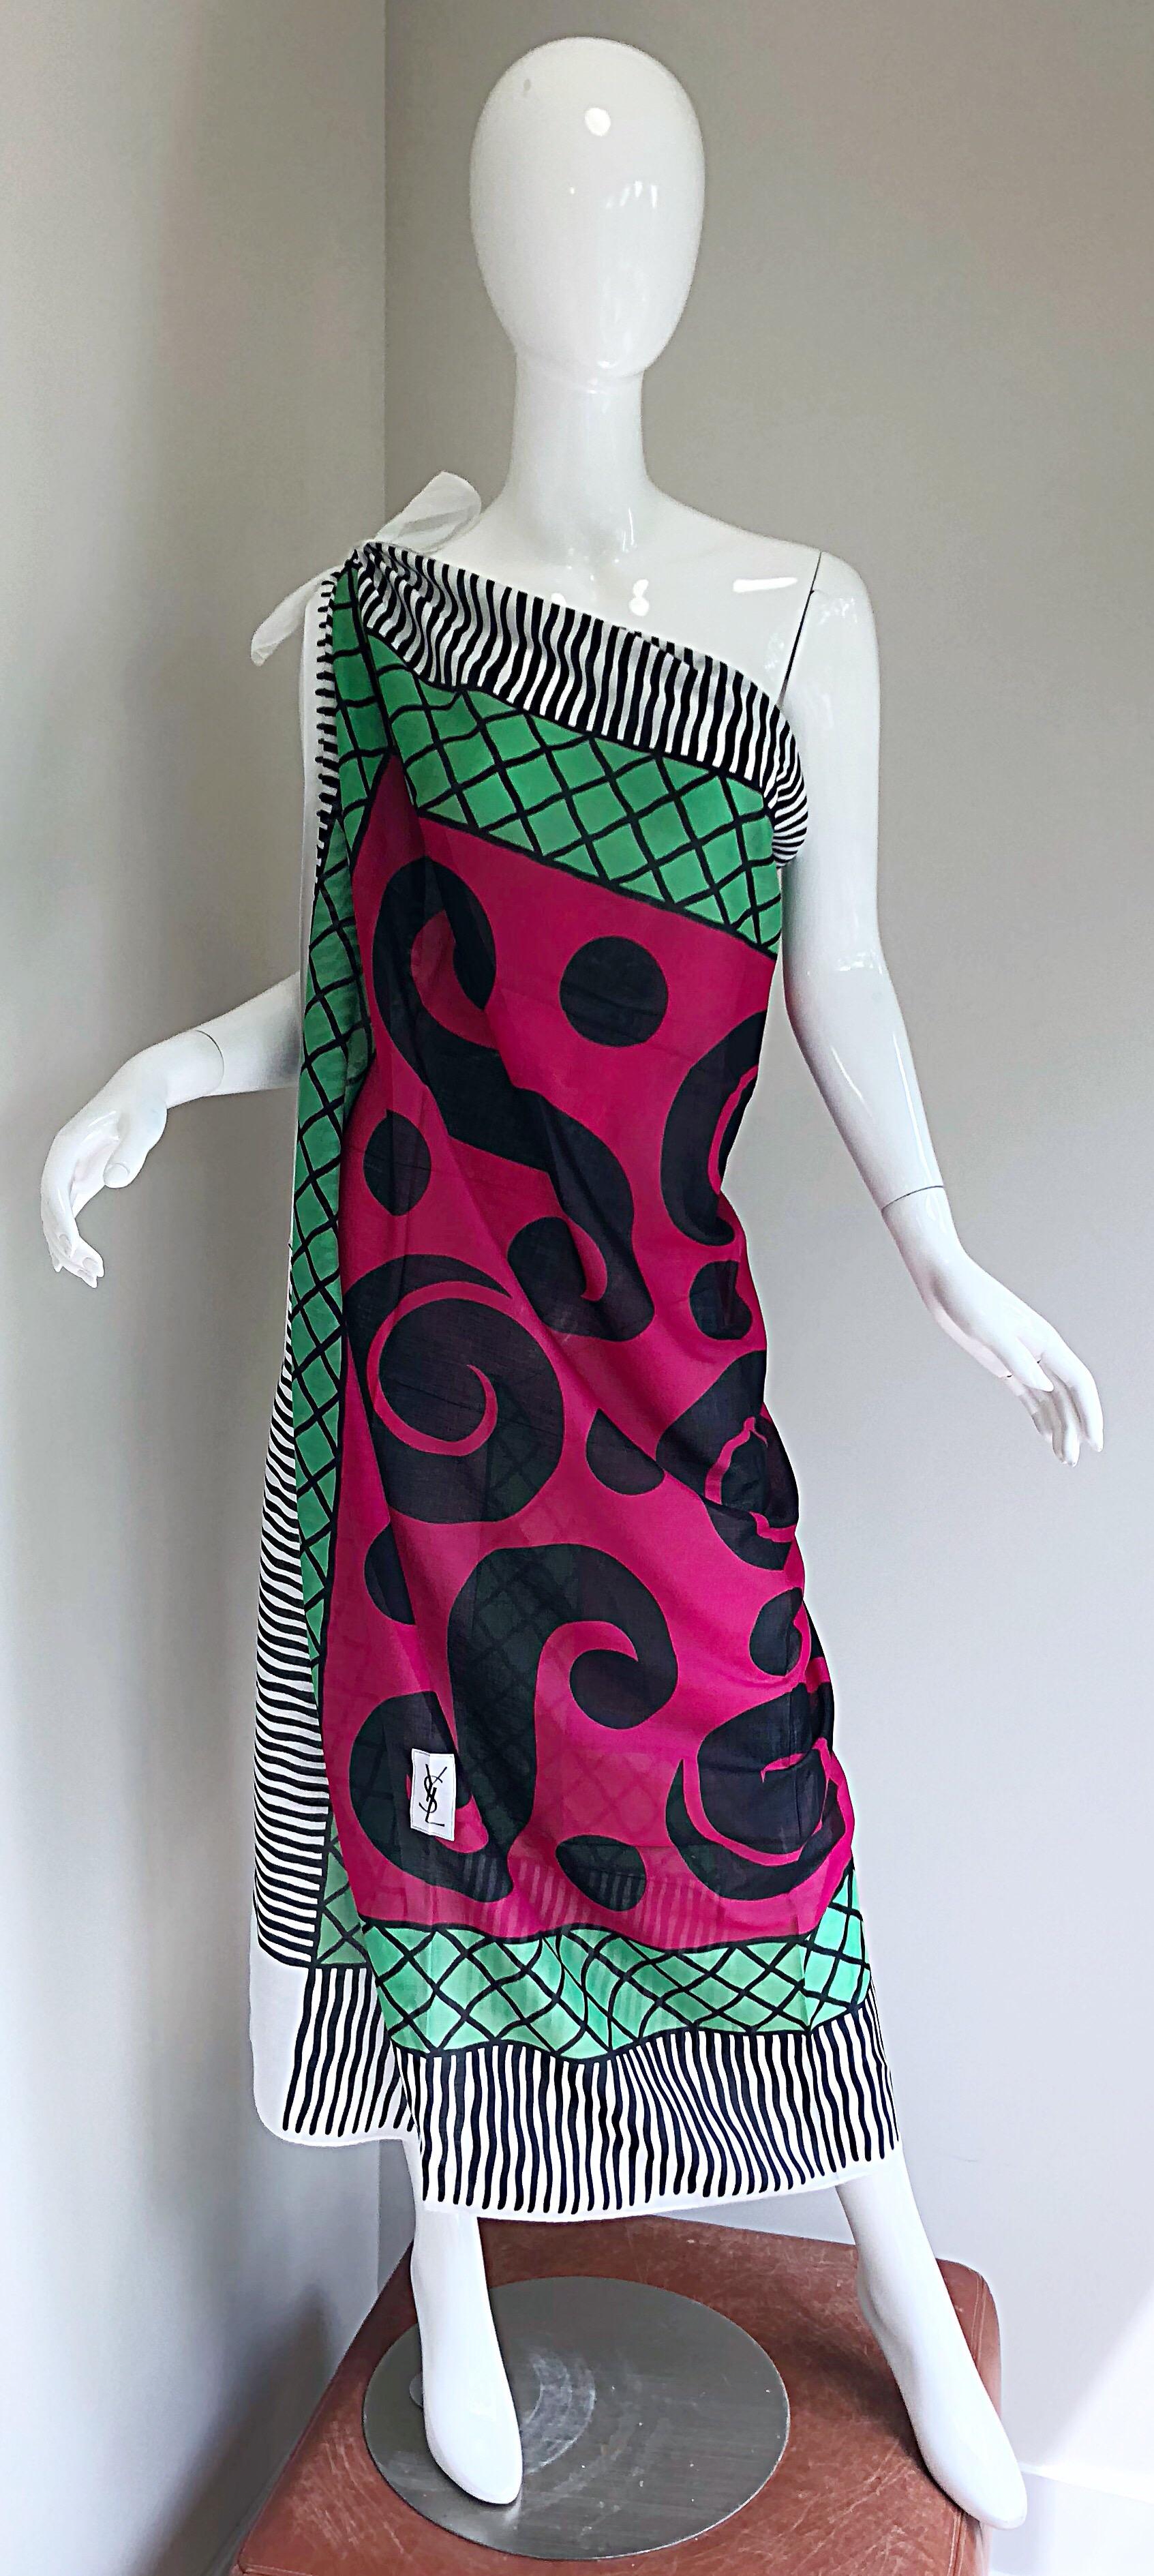 Iconic vintage YSL Yves Saint Laurent lightweight cotton jumbo shawl scarf / parero! Iconic question mark print in vibrant tones of raspberry, black green and white. Can be worn draped across the shoulders, as a wrap skirt, or belted as a one